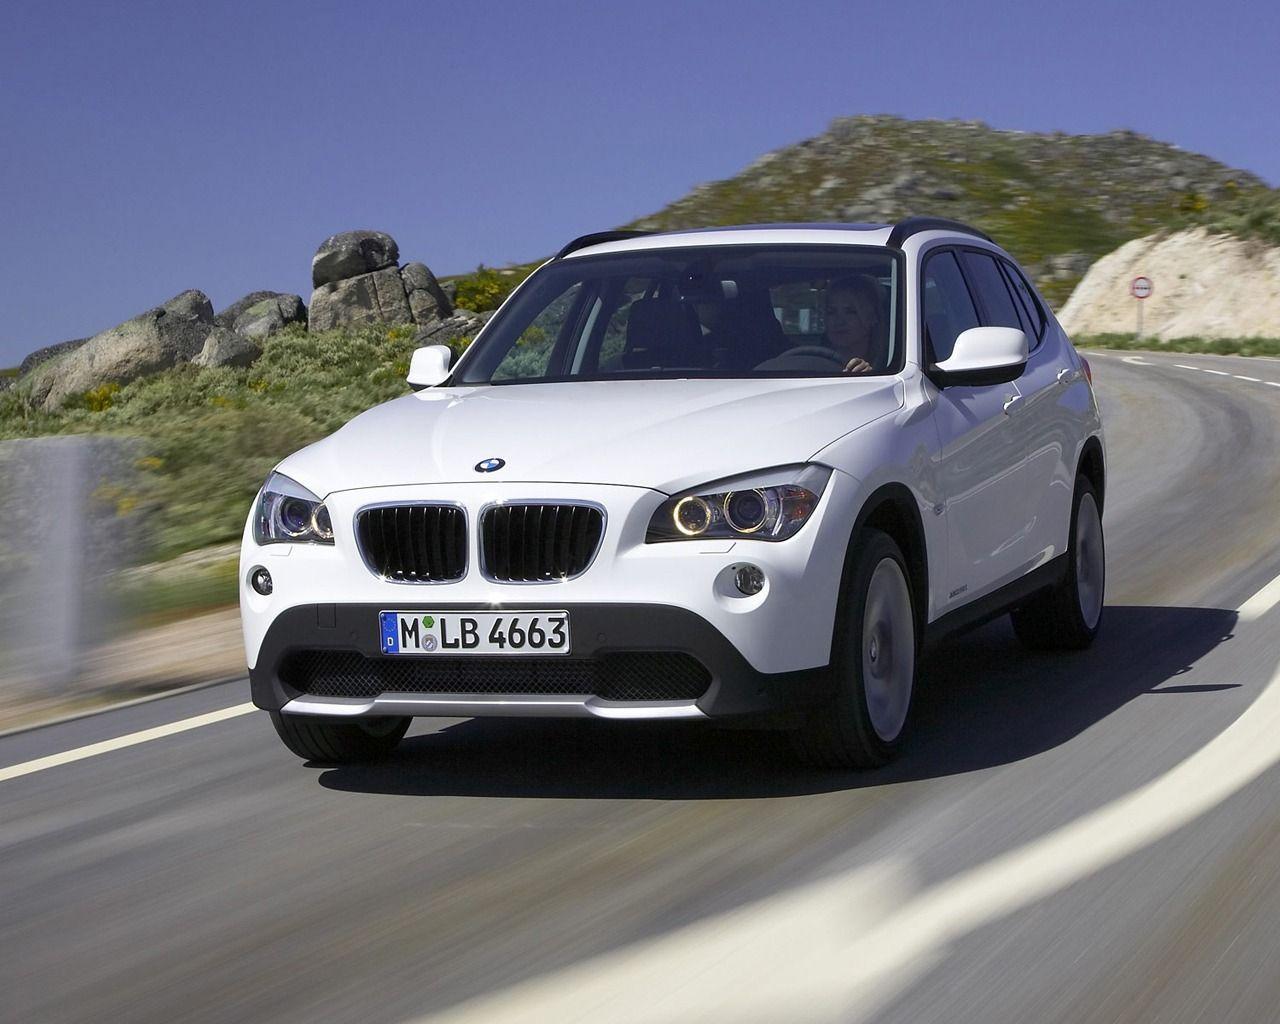 BMW X1 Wallpaper BMW Cars Wallpaper in jpg format for free download